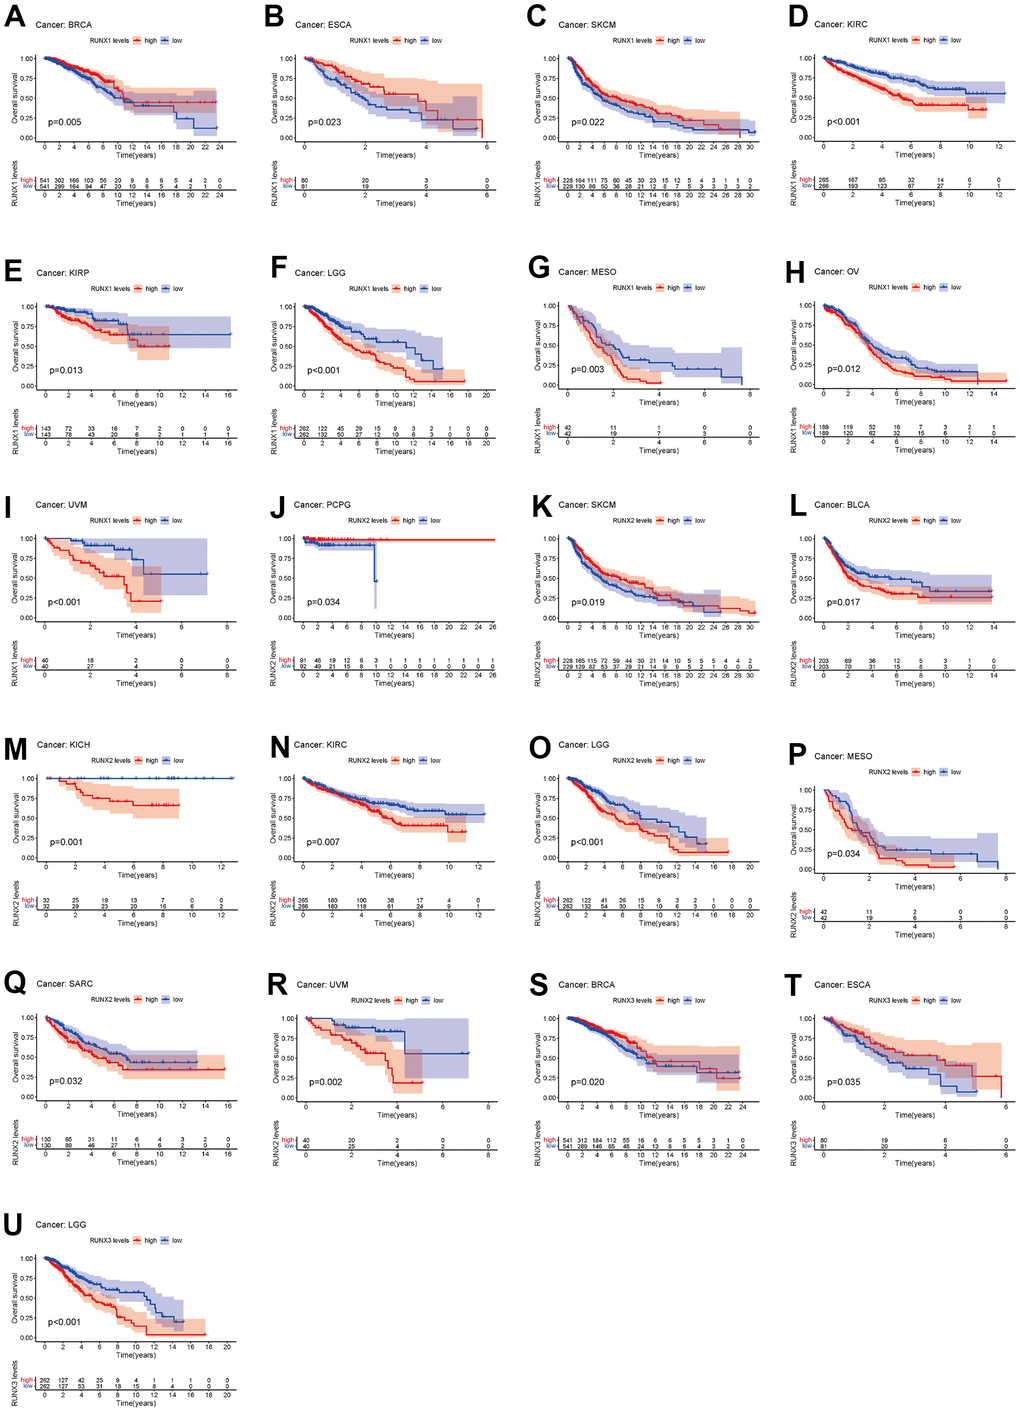 Kaplan–Meier survival curves comparing pan-cancer high and low expression of RUNX gene family genes. OS survival curves for RUNX1 in different cancers: (A) BRCA, (B) ESCA, (C) SKCM, (D) KIRC, (E) KIRP, (F) LGG, (G) MESO, (H) OV, (I) UVM. OS survival curves for RUNX2 in different cancers: (J) PCPG, (K) SKCM, (L) BLCA, (M) KICH, (N) KIRC, (O) LGG, (P) MESO, (Q) SARC. OS survival curves for RUNX3 in different cancers: (R) UVM, (S) BRCA, (T) ESCA, (U) LGG.